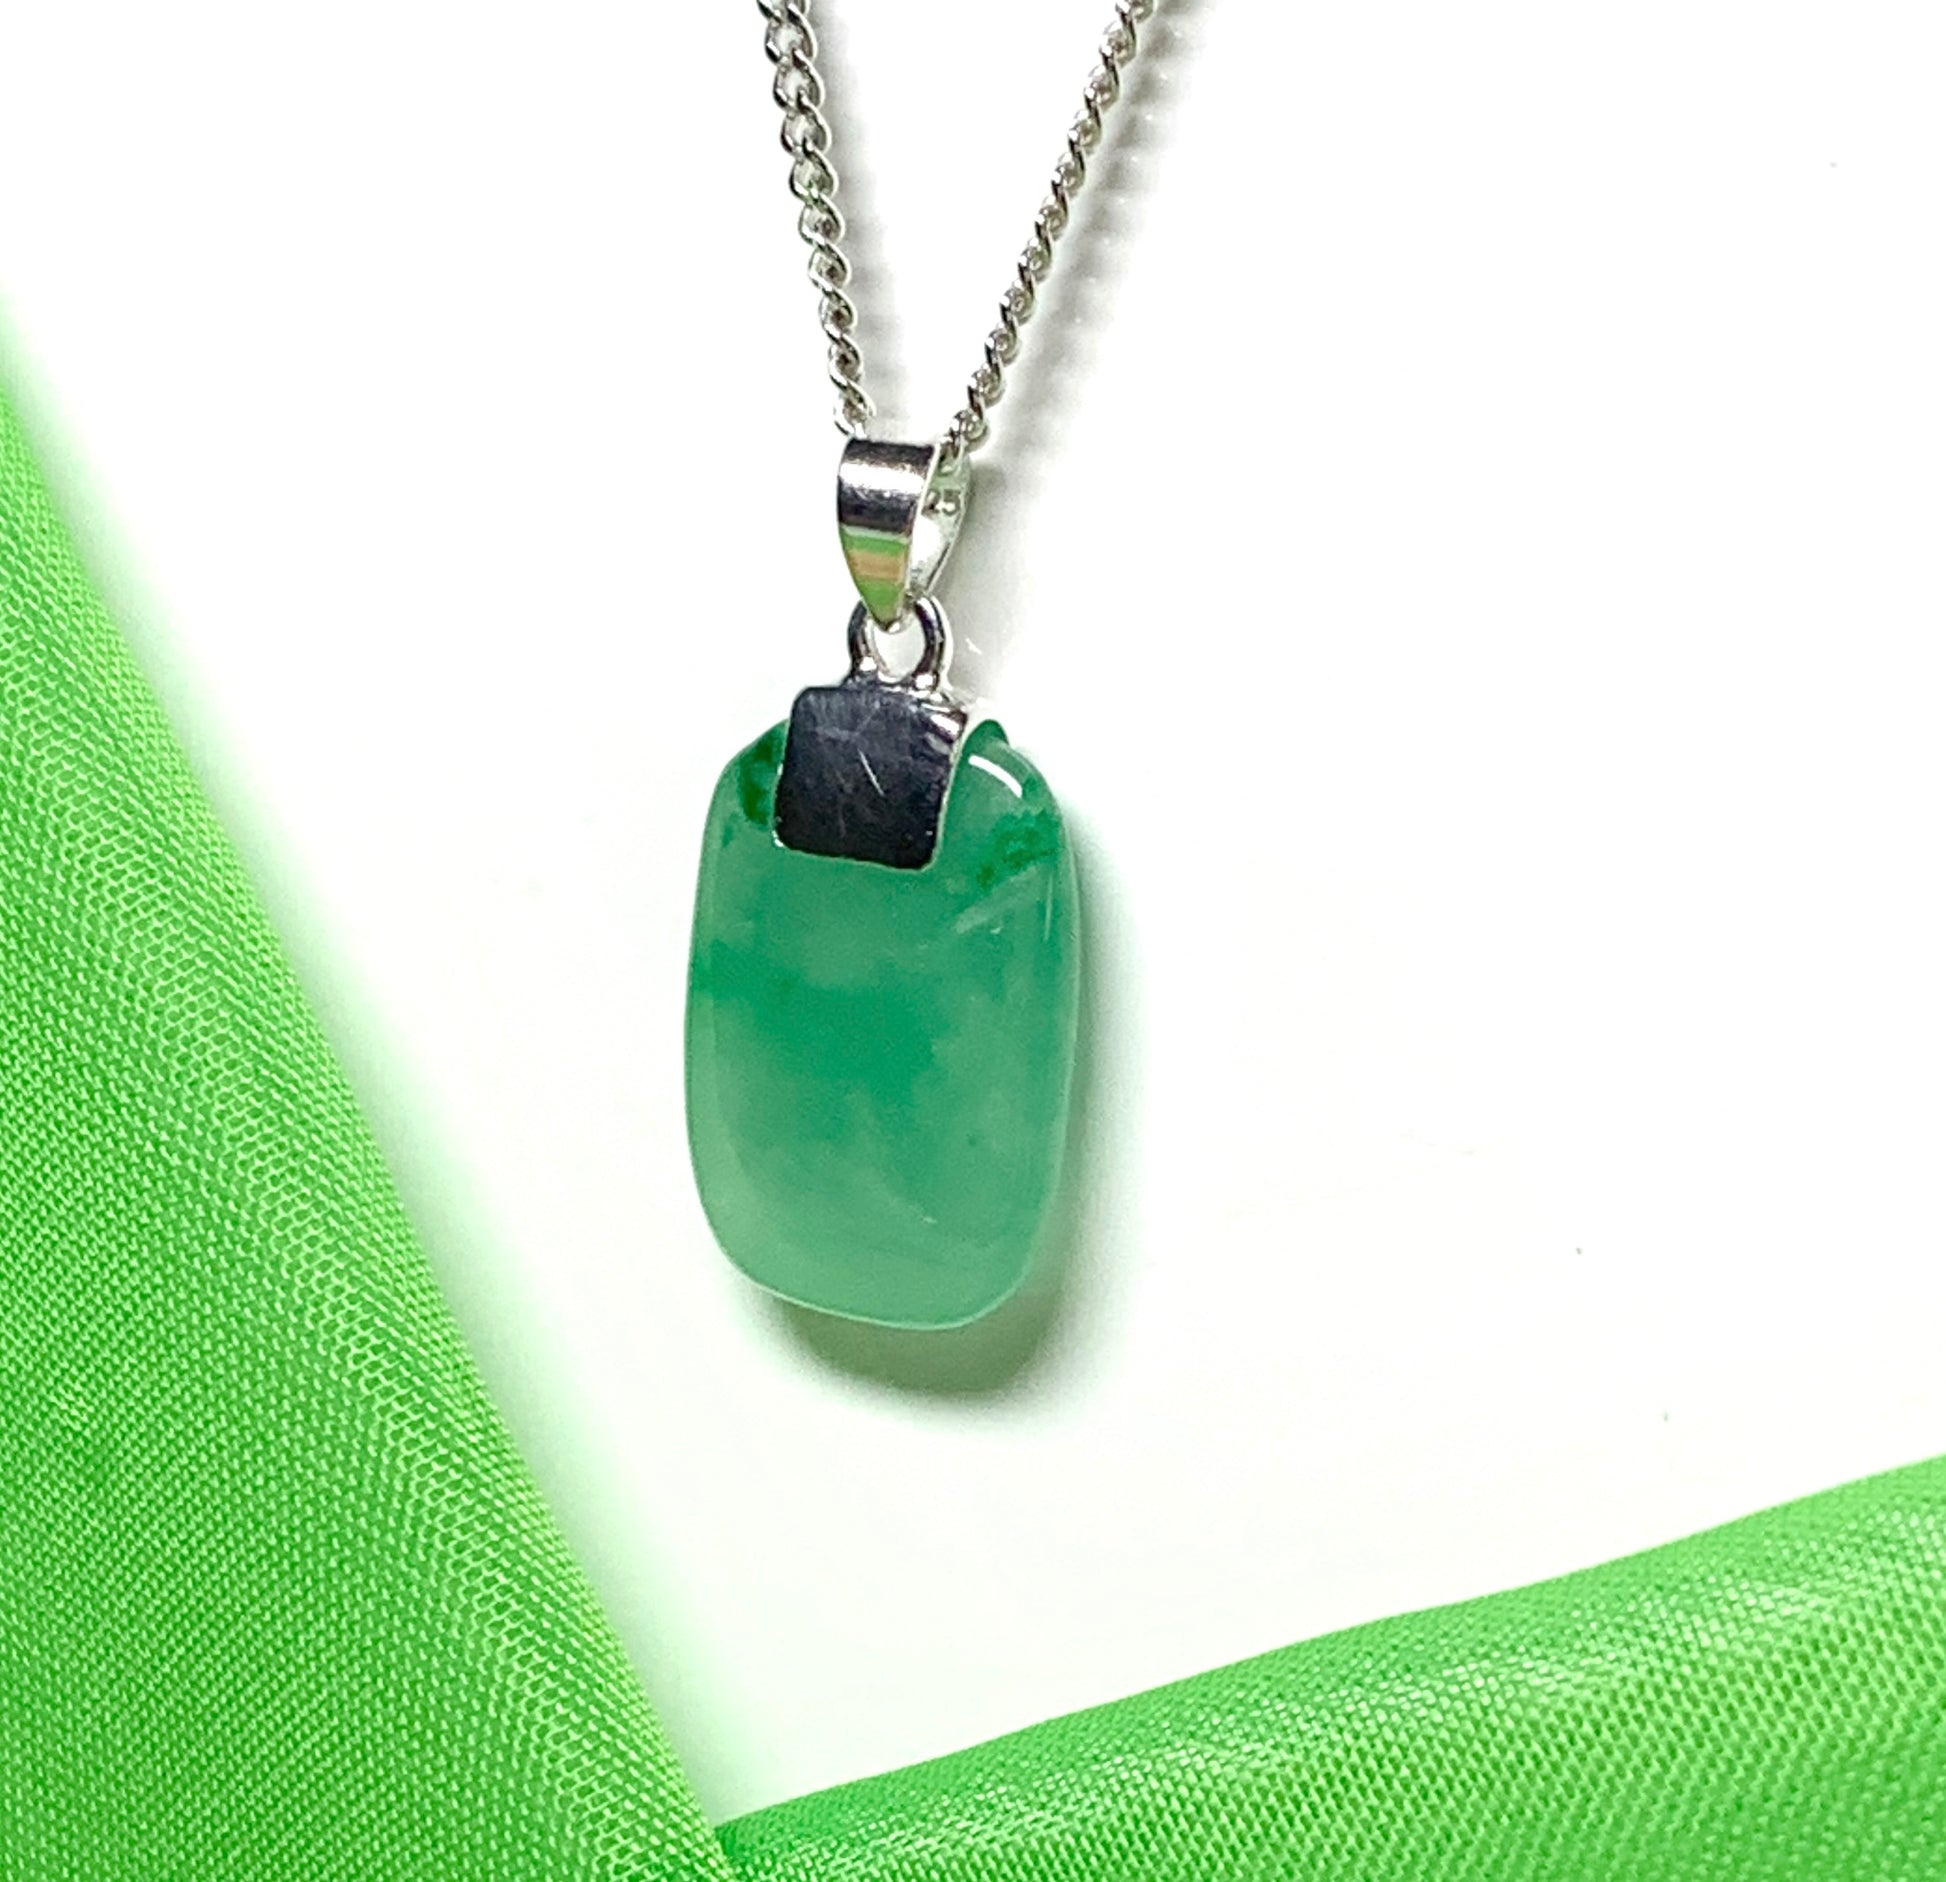 Real green jade necklace cushion shaped stone sterling silver chain included